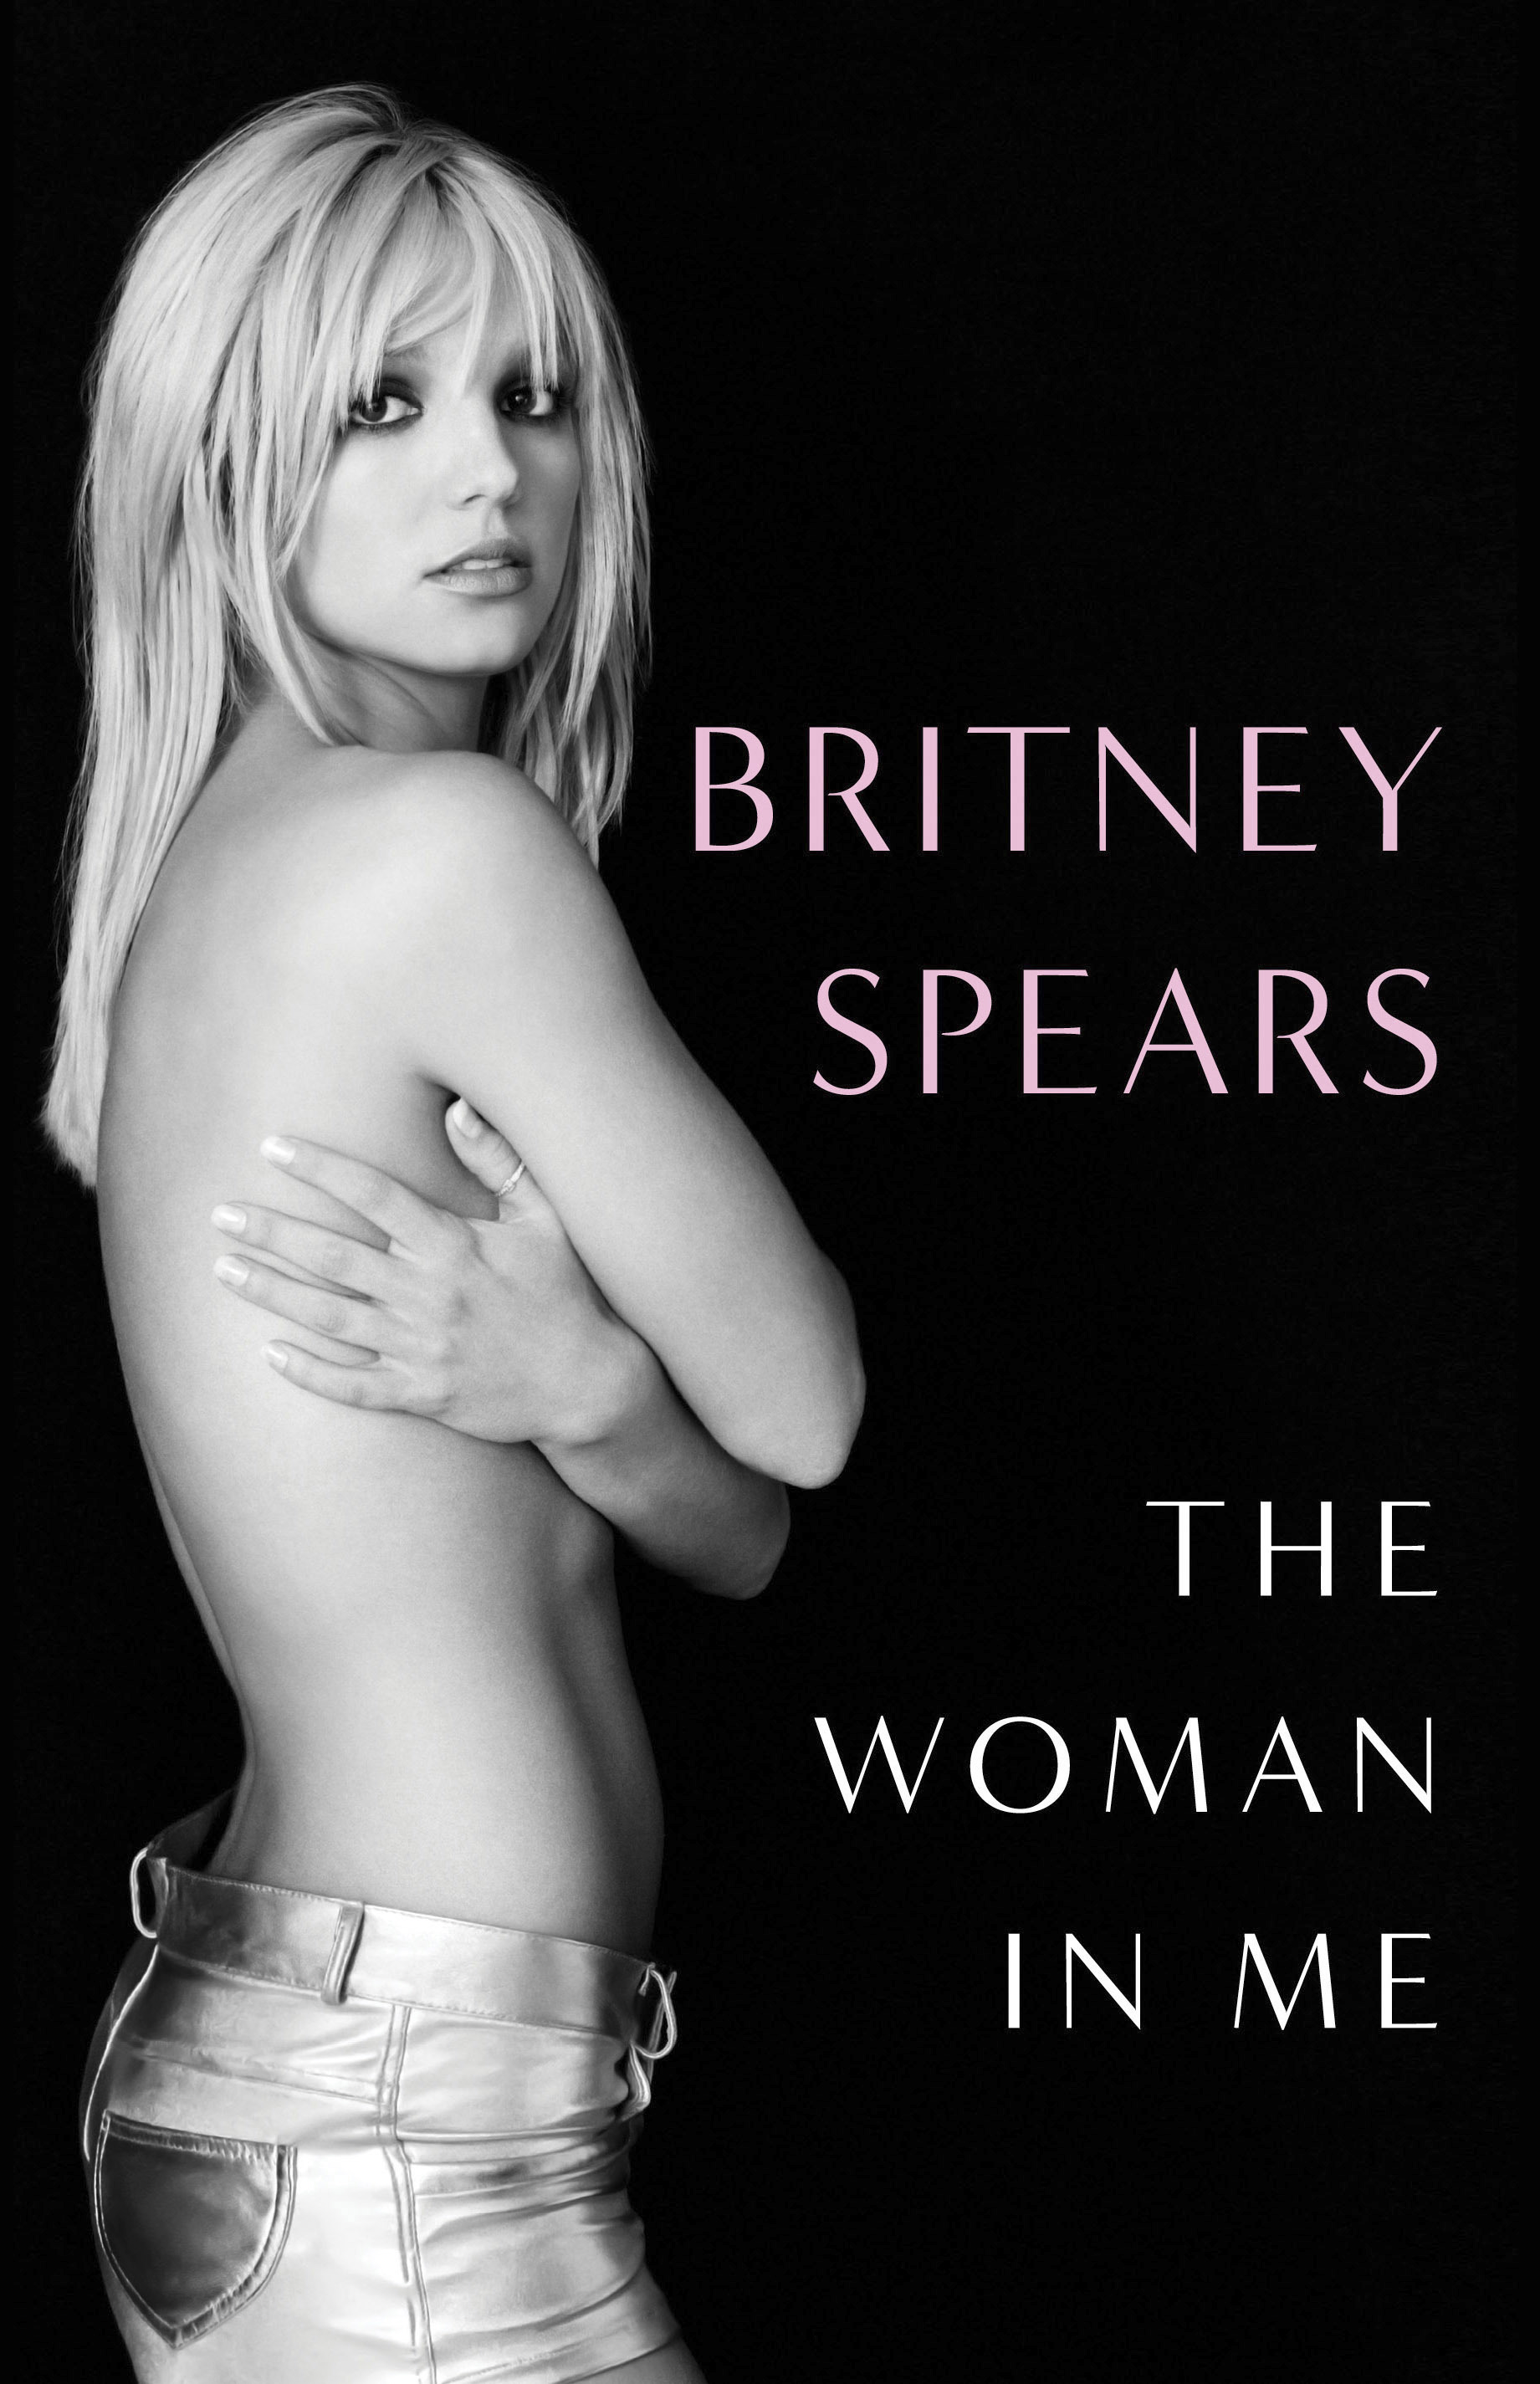 Britney accused Justin of cheating, as well as confessing to getting an abortion while dating the singer in her book, The Woman in Me